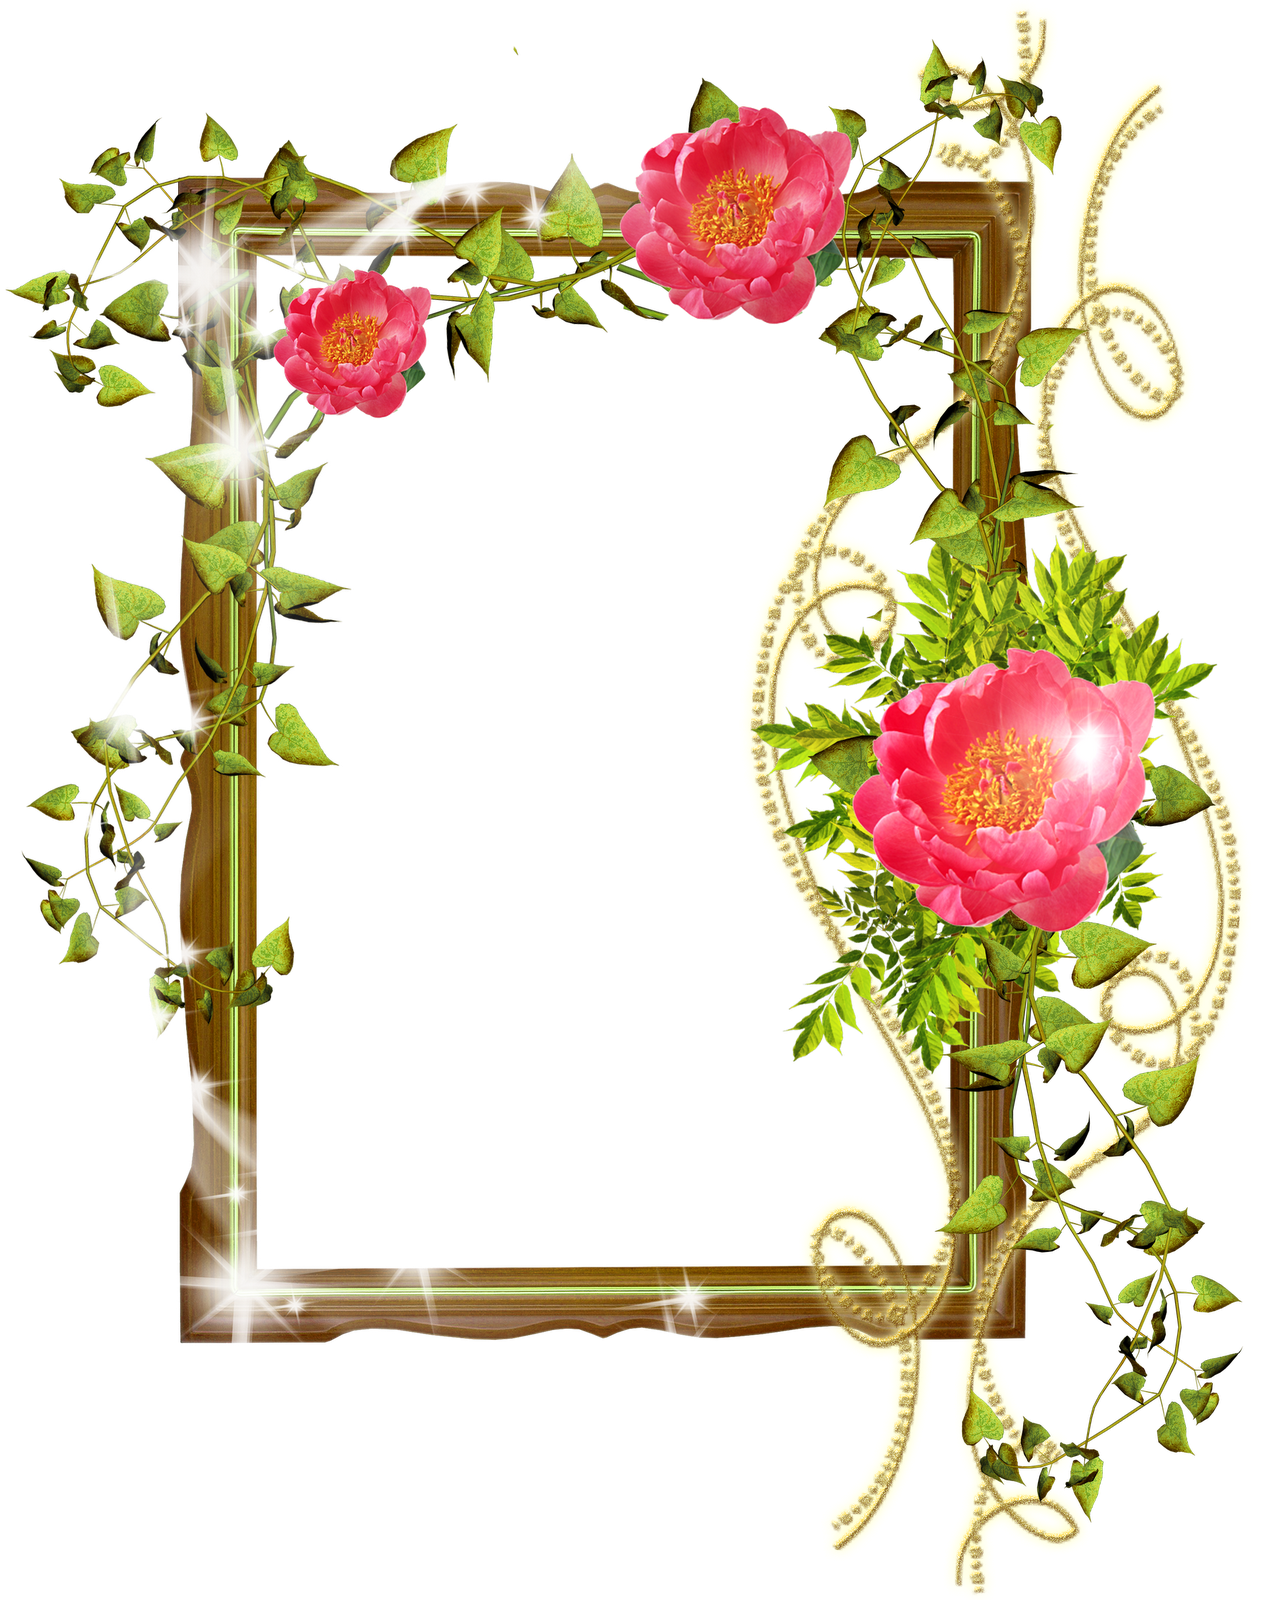 Flower Frame Photoshop Background Png - Photoshop Background Hd Png (1288x1600), Png Download